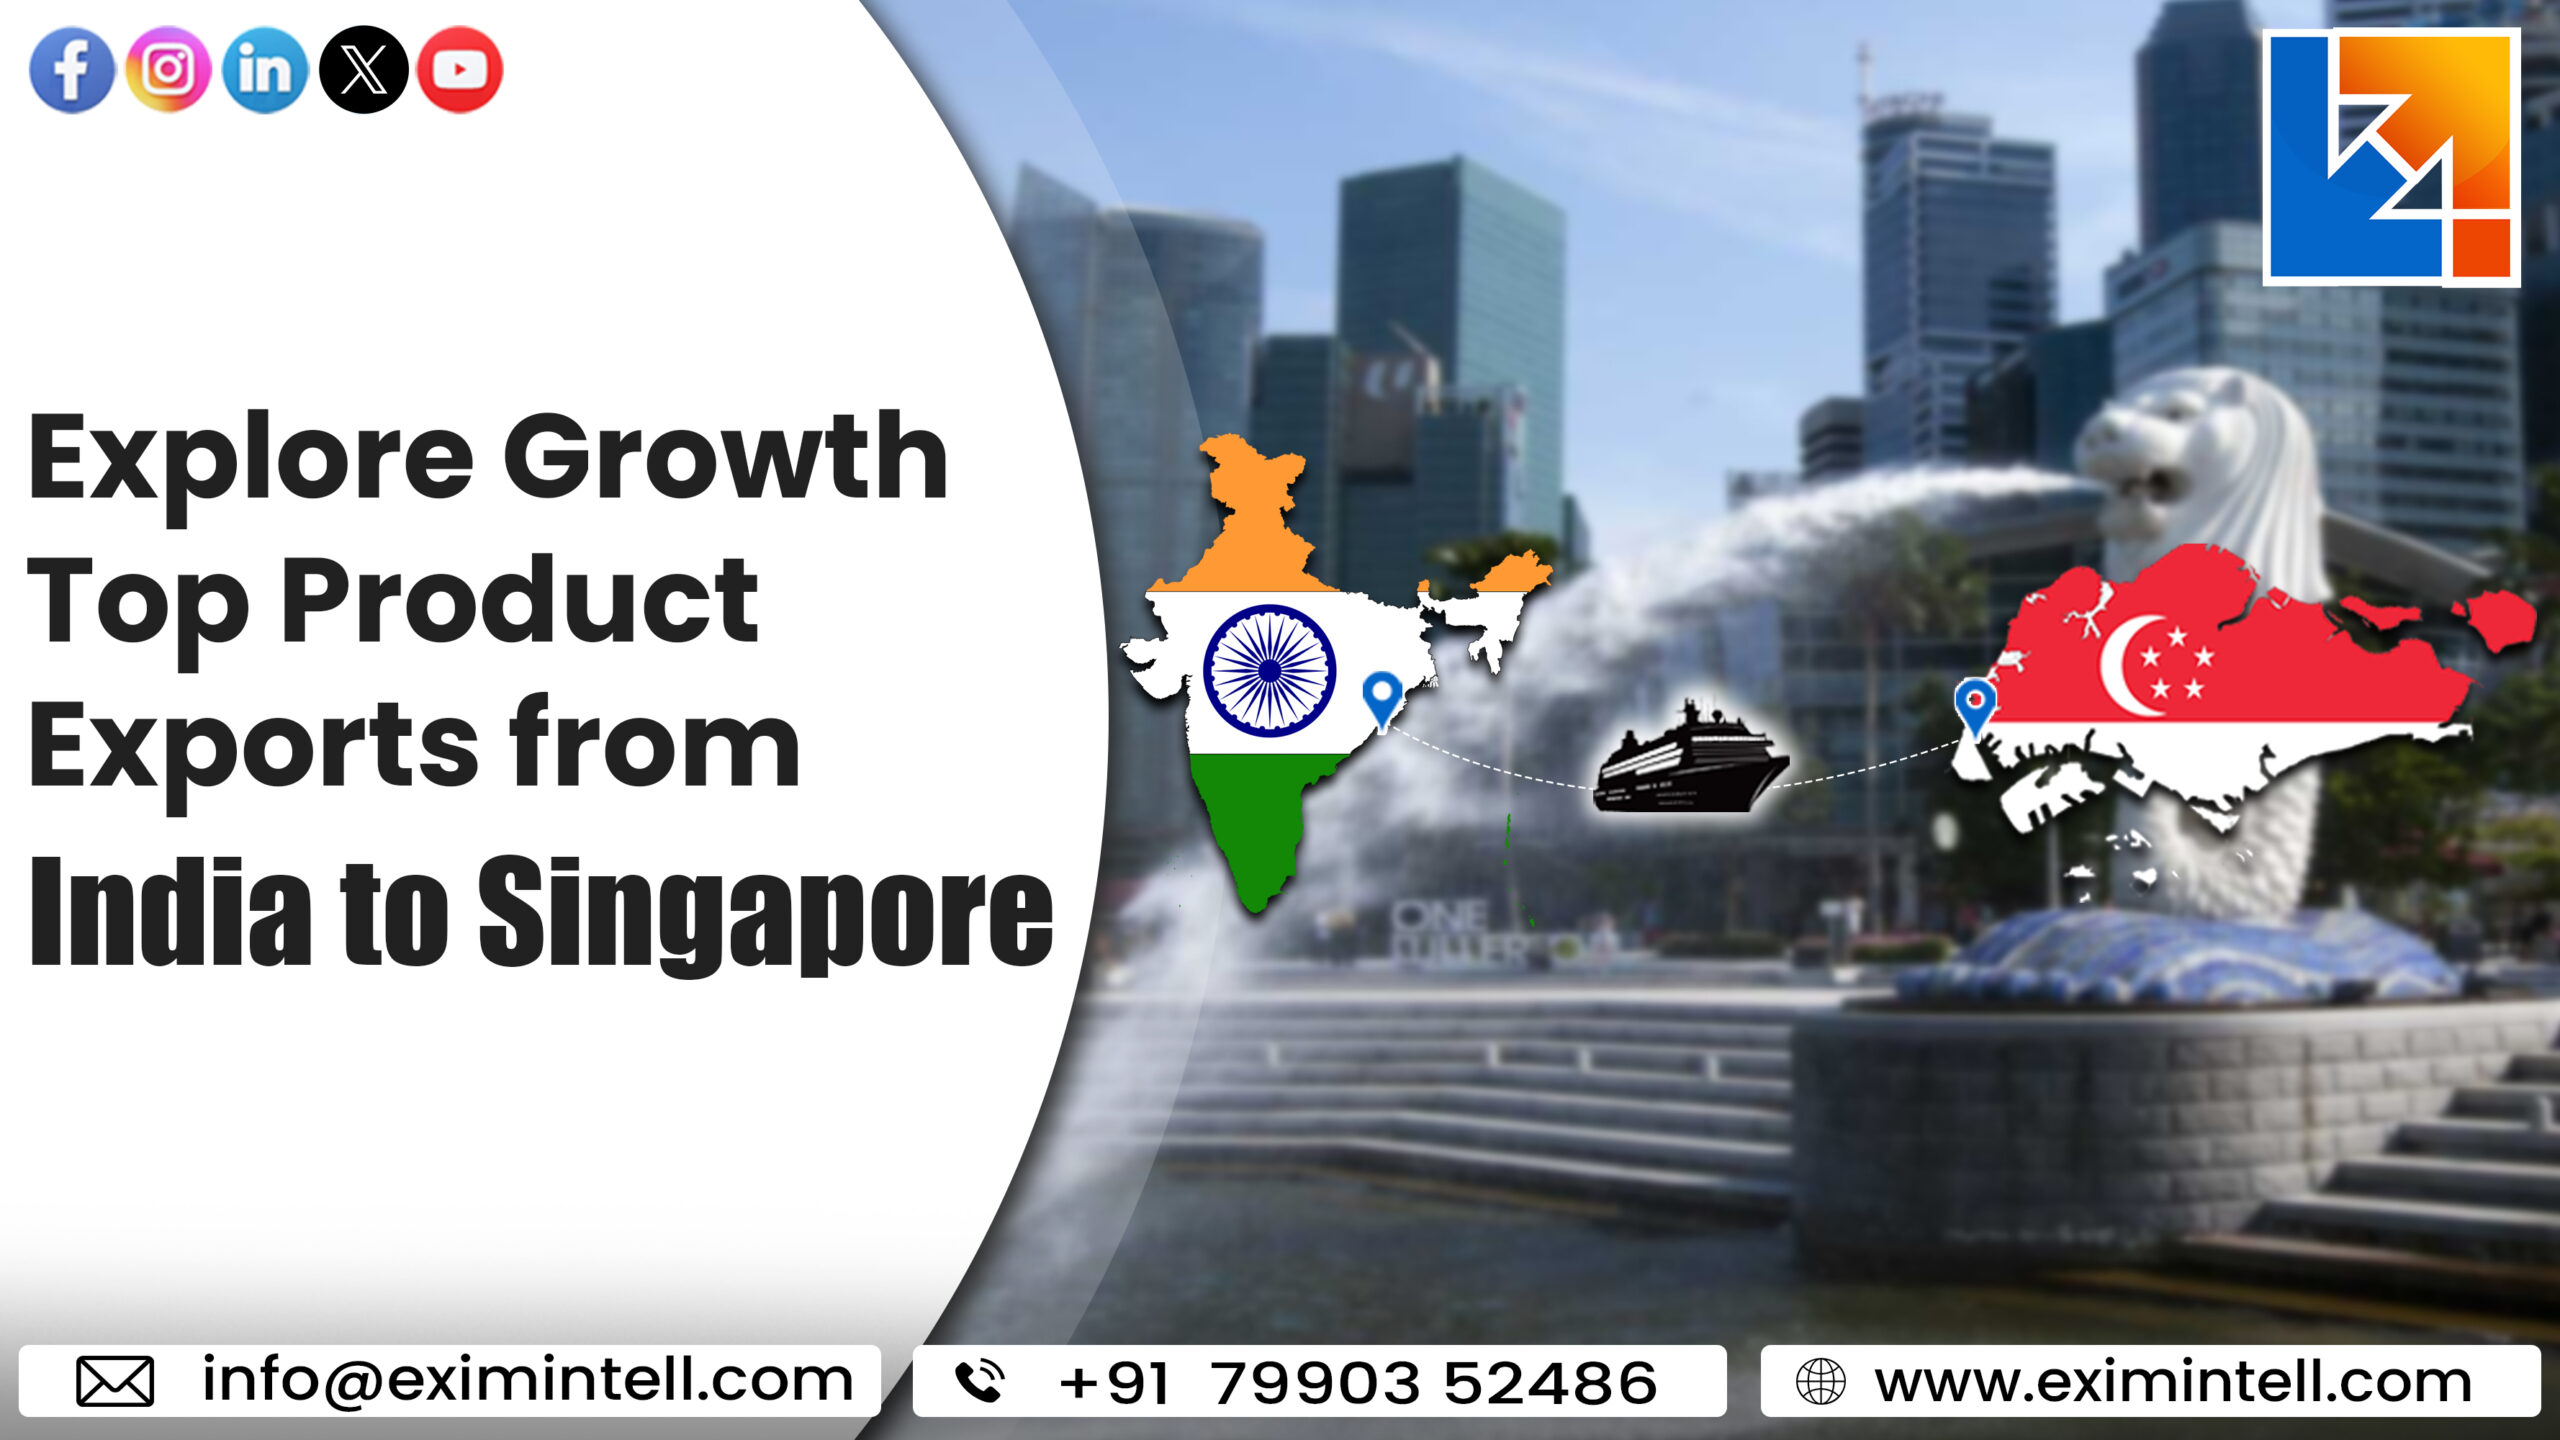 Explore Growth- Top Product Exports from India to Singapore